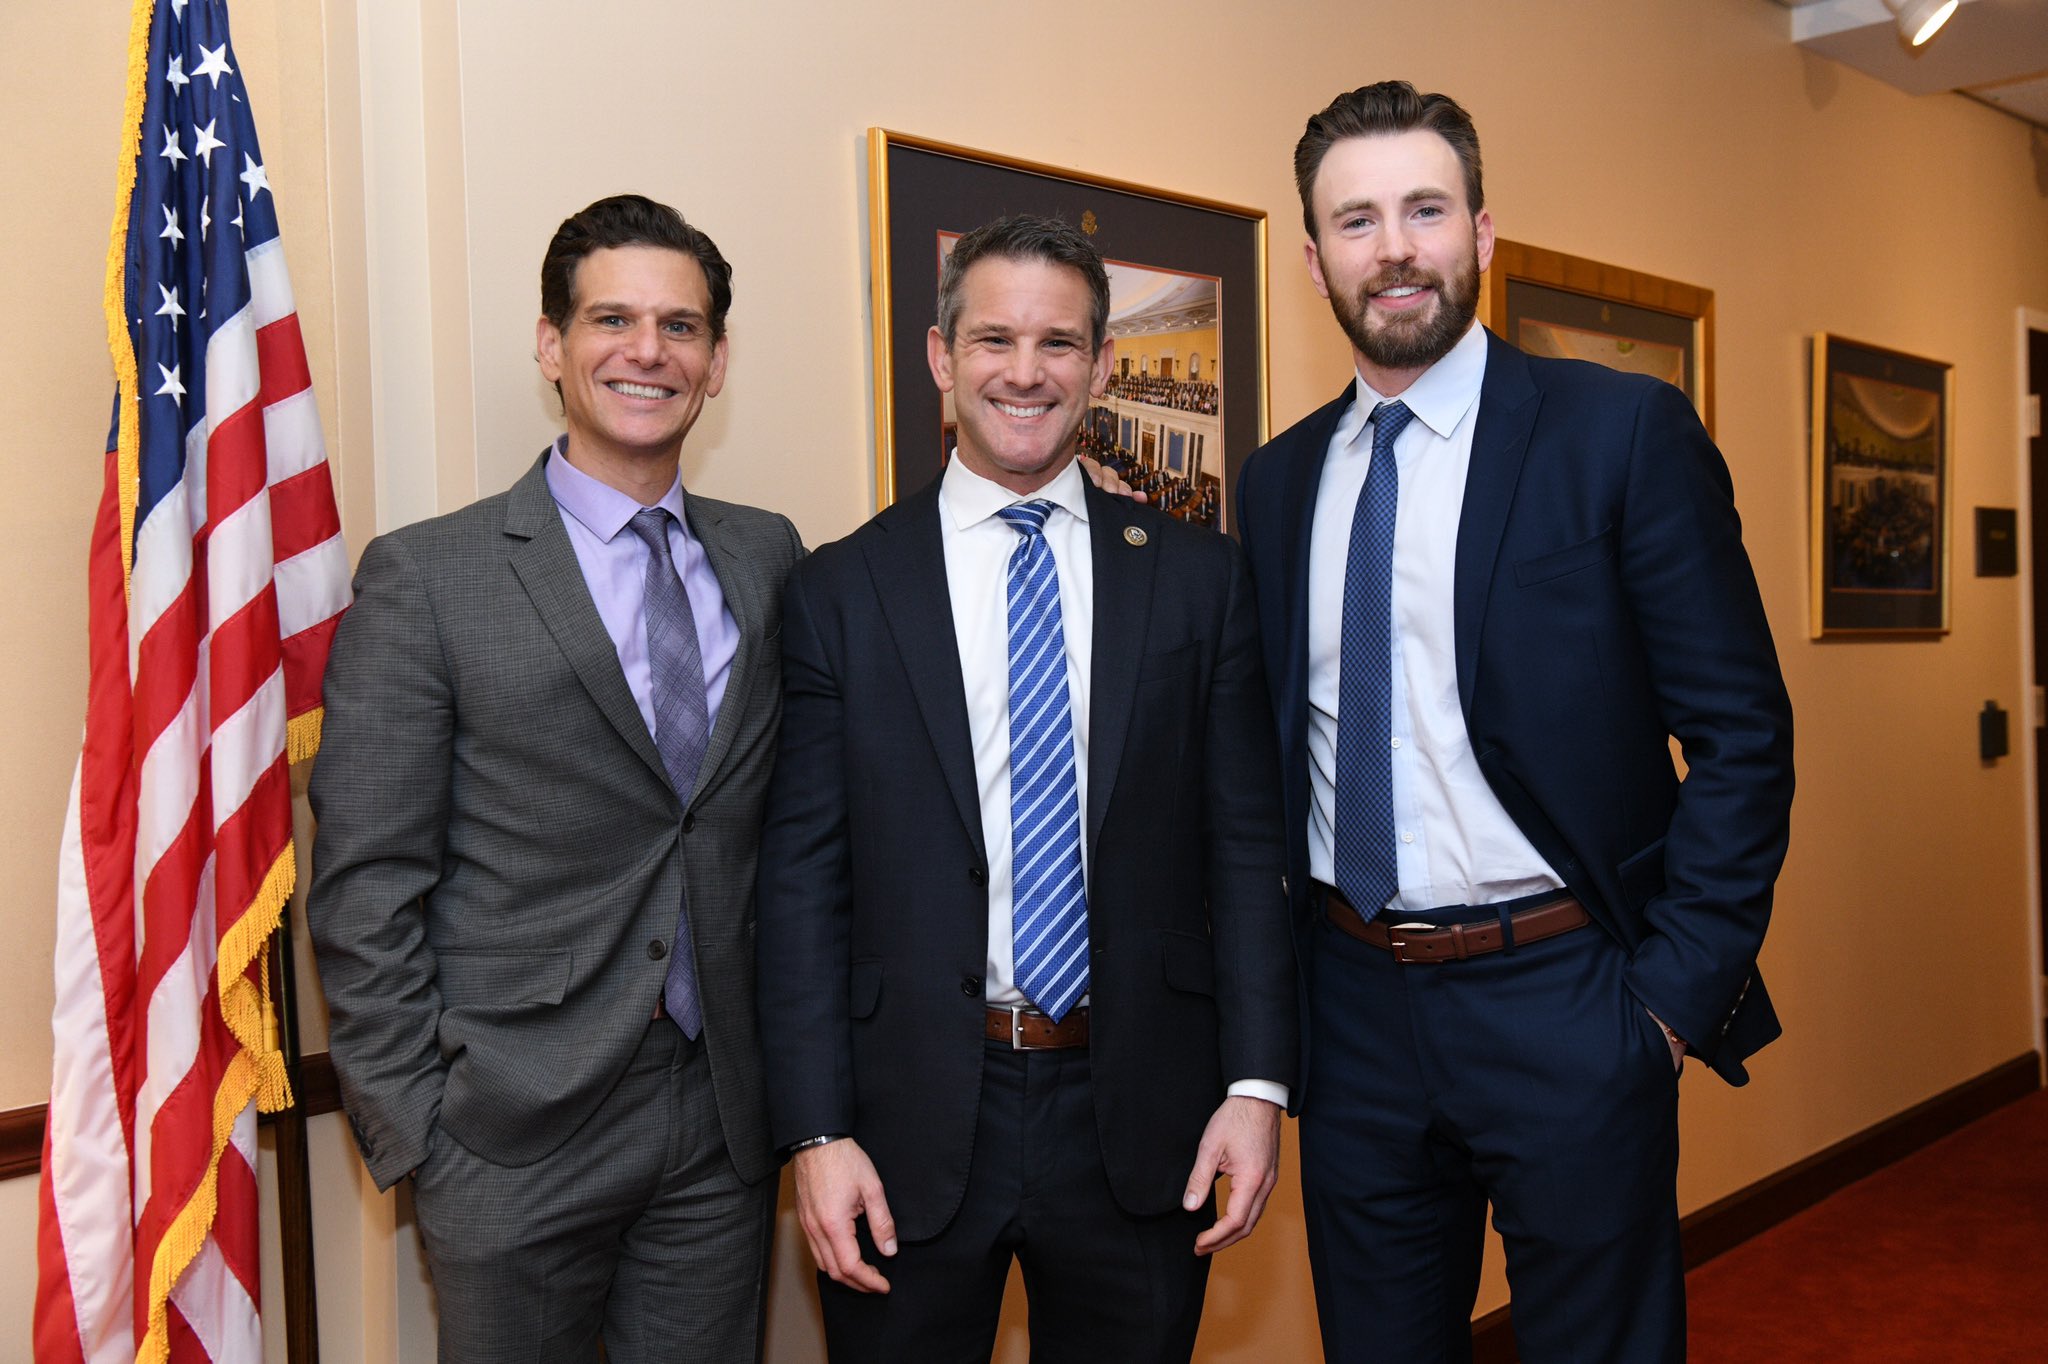 Adam Kinzinger On Twitter Lieutenant Colonel Outranks Captain Even If Your Last Name Is America Still I M Glad To Join Chrisevans And Markkassen In Their Mission To Educate And Civically Engage